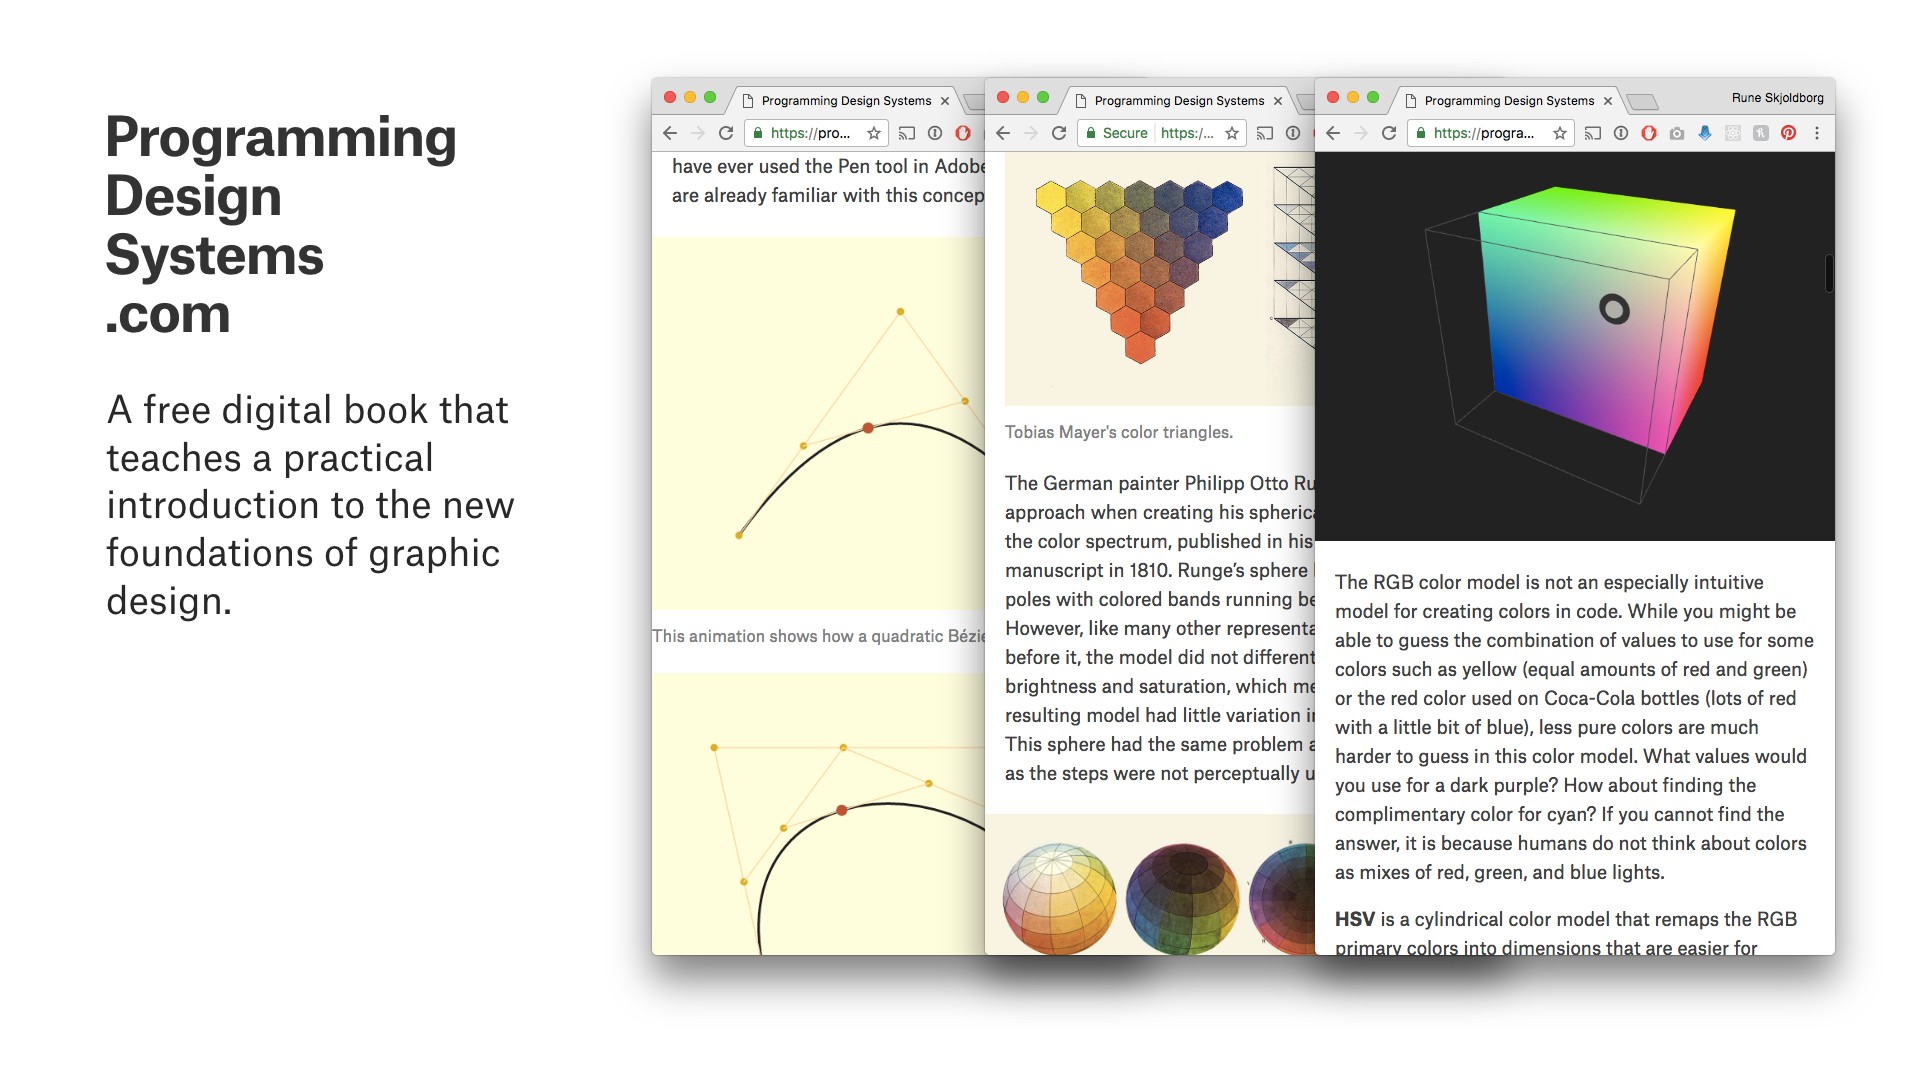 Three different shots of Rune's book 'Programming Design Systems' showing color models and bezier curve diagrams.